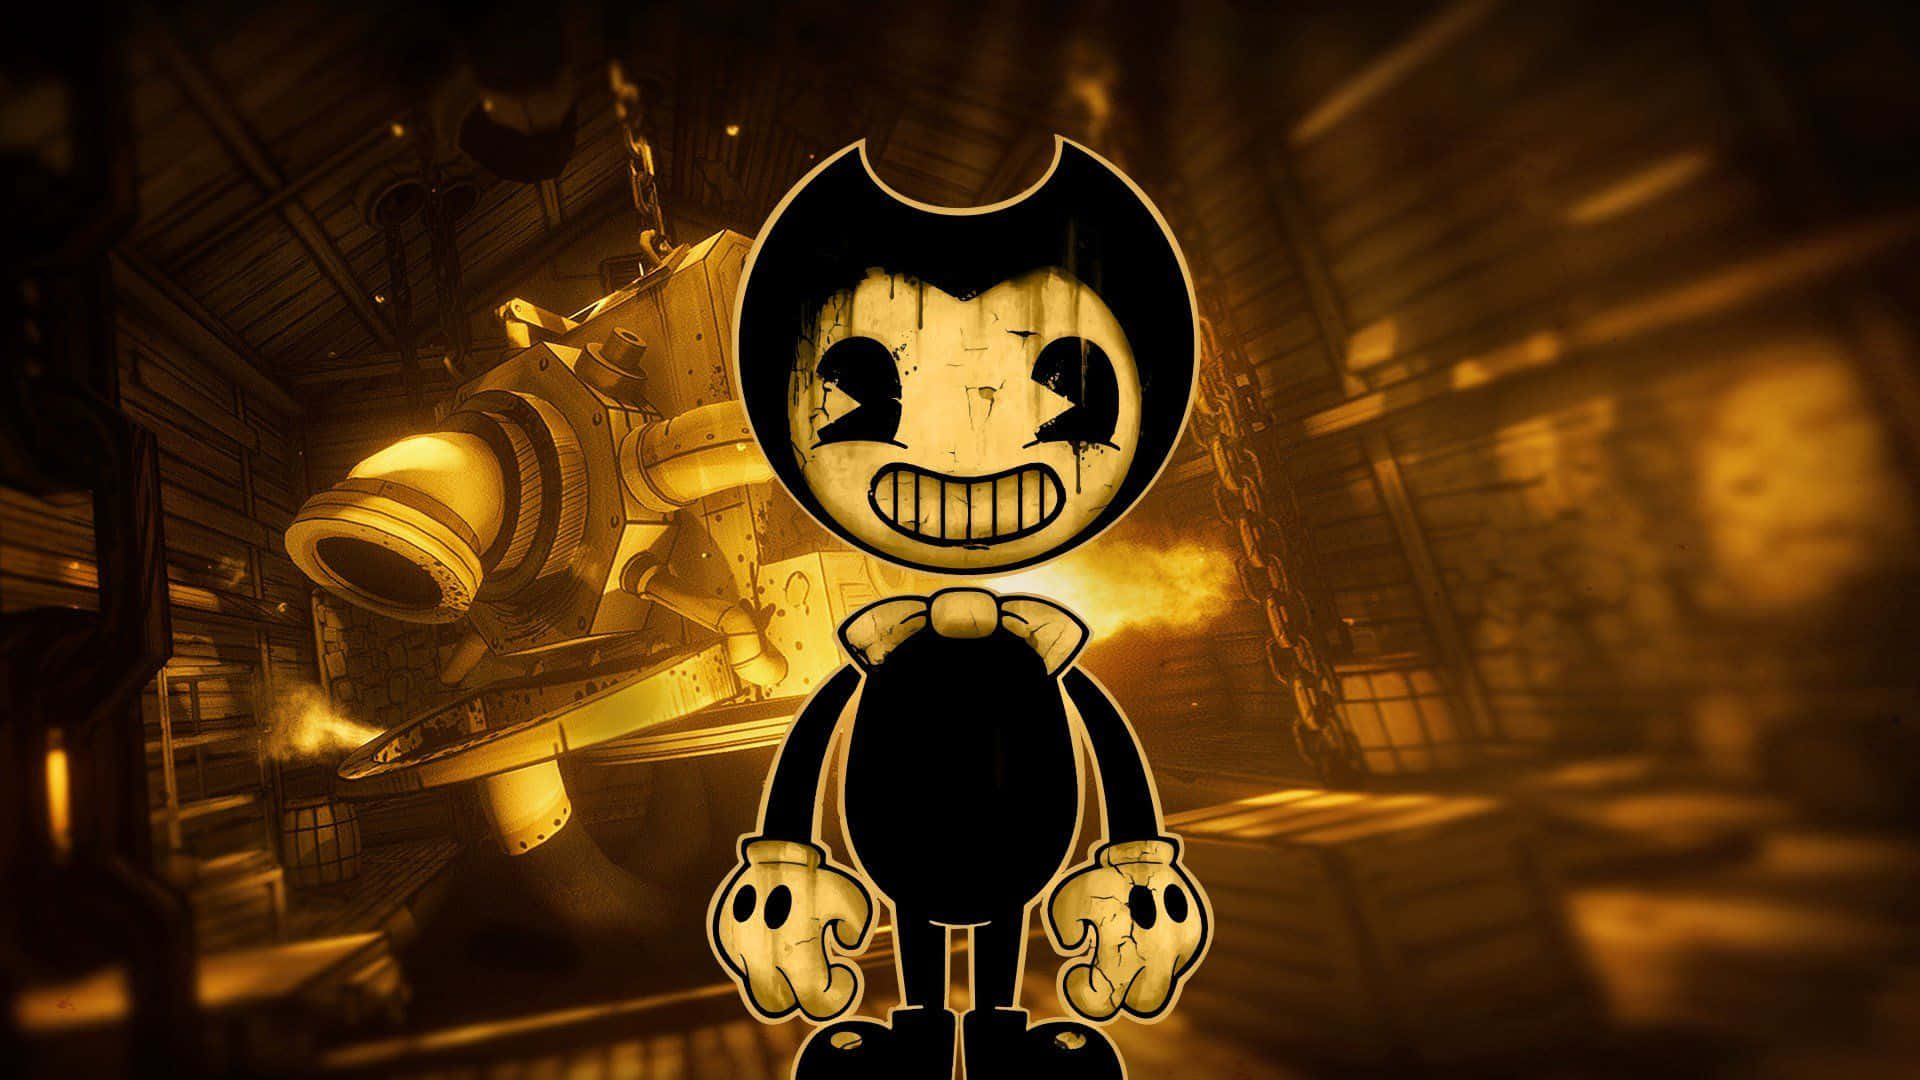 Explore the world of 'Bendy and the Ink Machine'